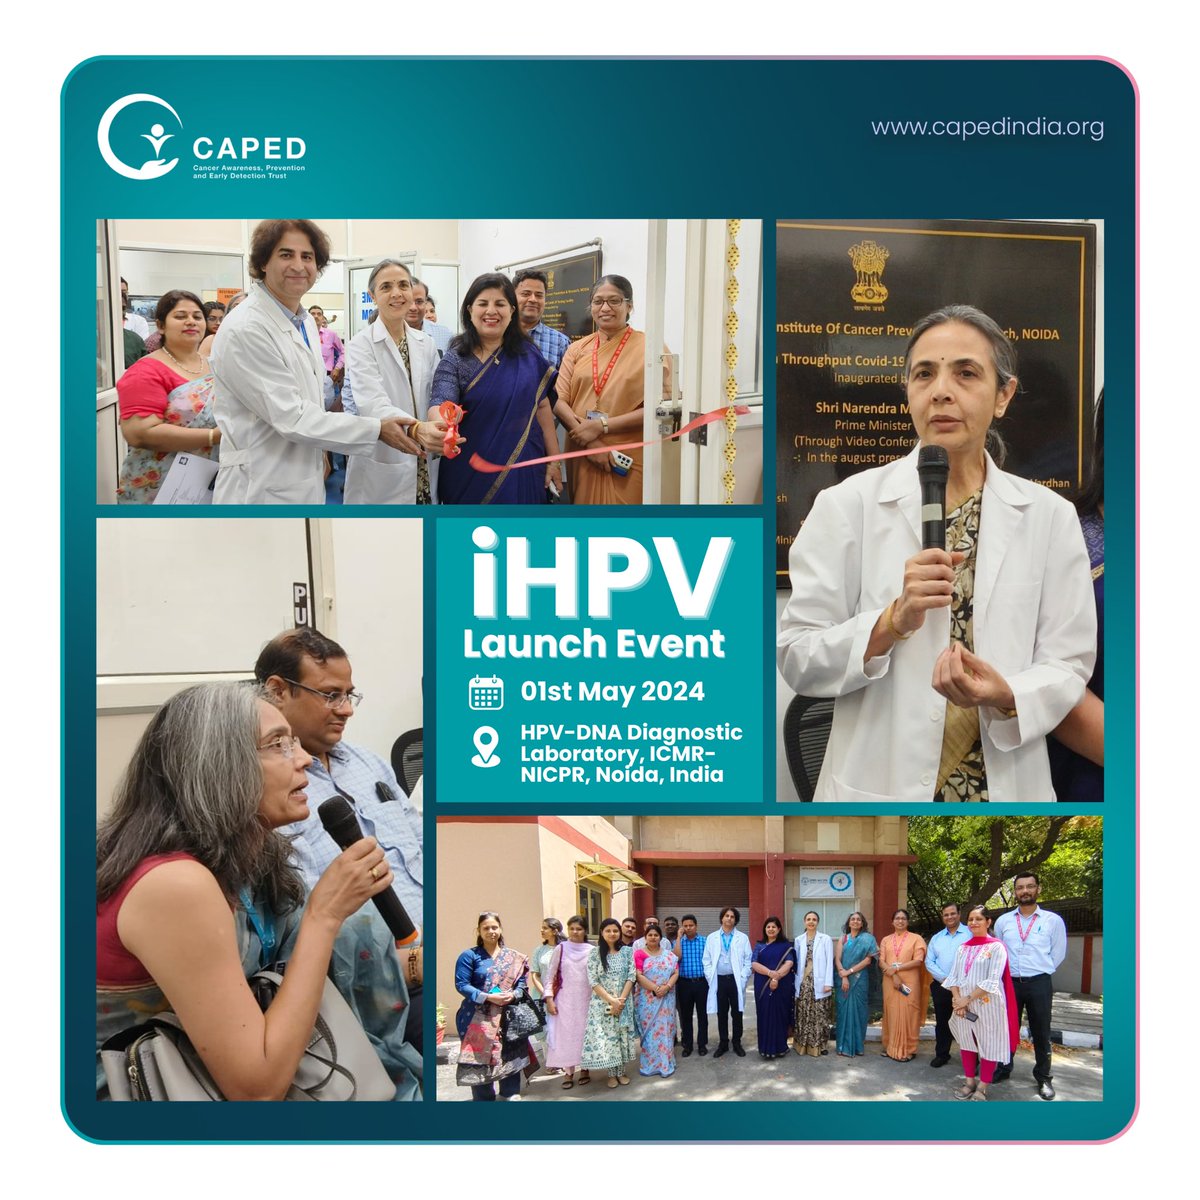 1st of May witnessed the momentous launch event of Validation Study of Indigenous HPV Tests (iHPV), to serve the purpose Of Cervical Cancer Screening. #cervicalcancer #womenhealth #HPV #cervicalcancermuktbharat